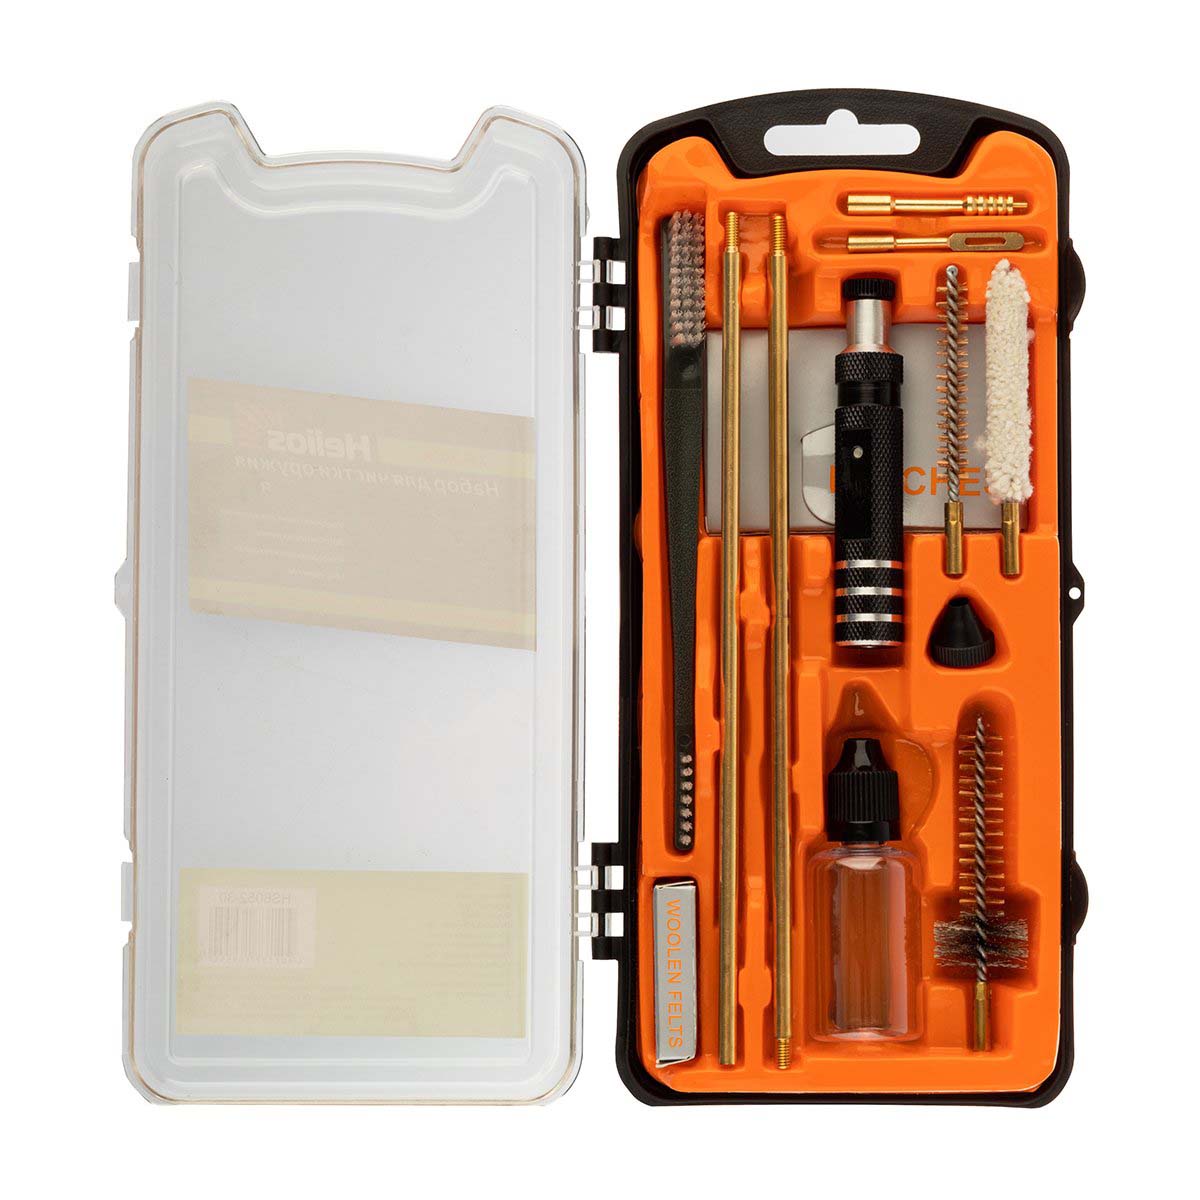 Gun Cleaning Kit, .308 Caliber, 12 Items is compactly packed into a Plastic case